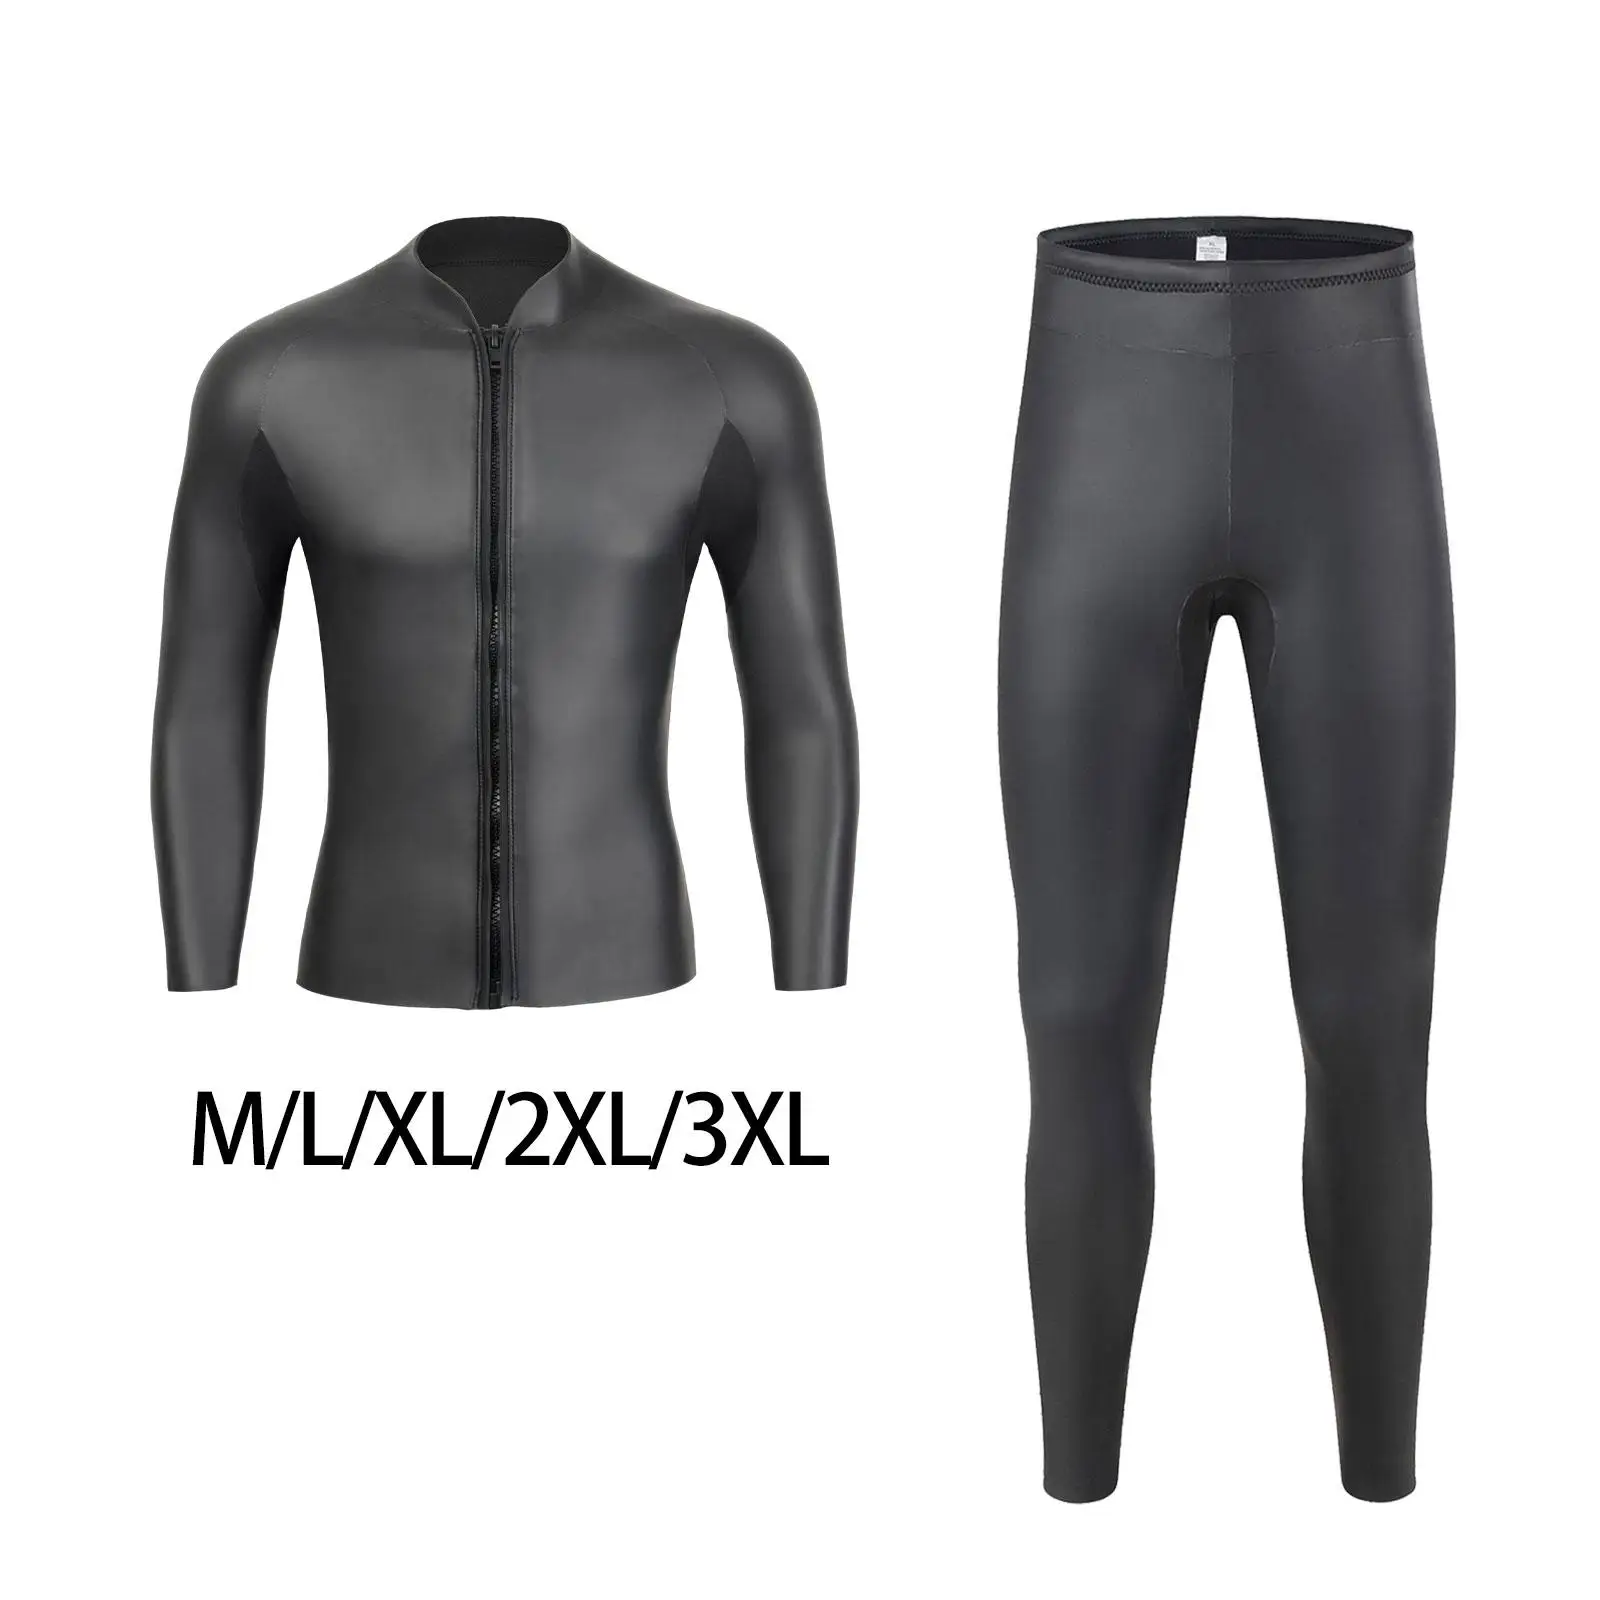 Wetsuit Top Stretch UV Protection 3mm with Zipper High Elastic Long Sleeve for Snorkeling Freediving Canoeing surfing cold water